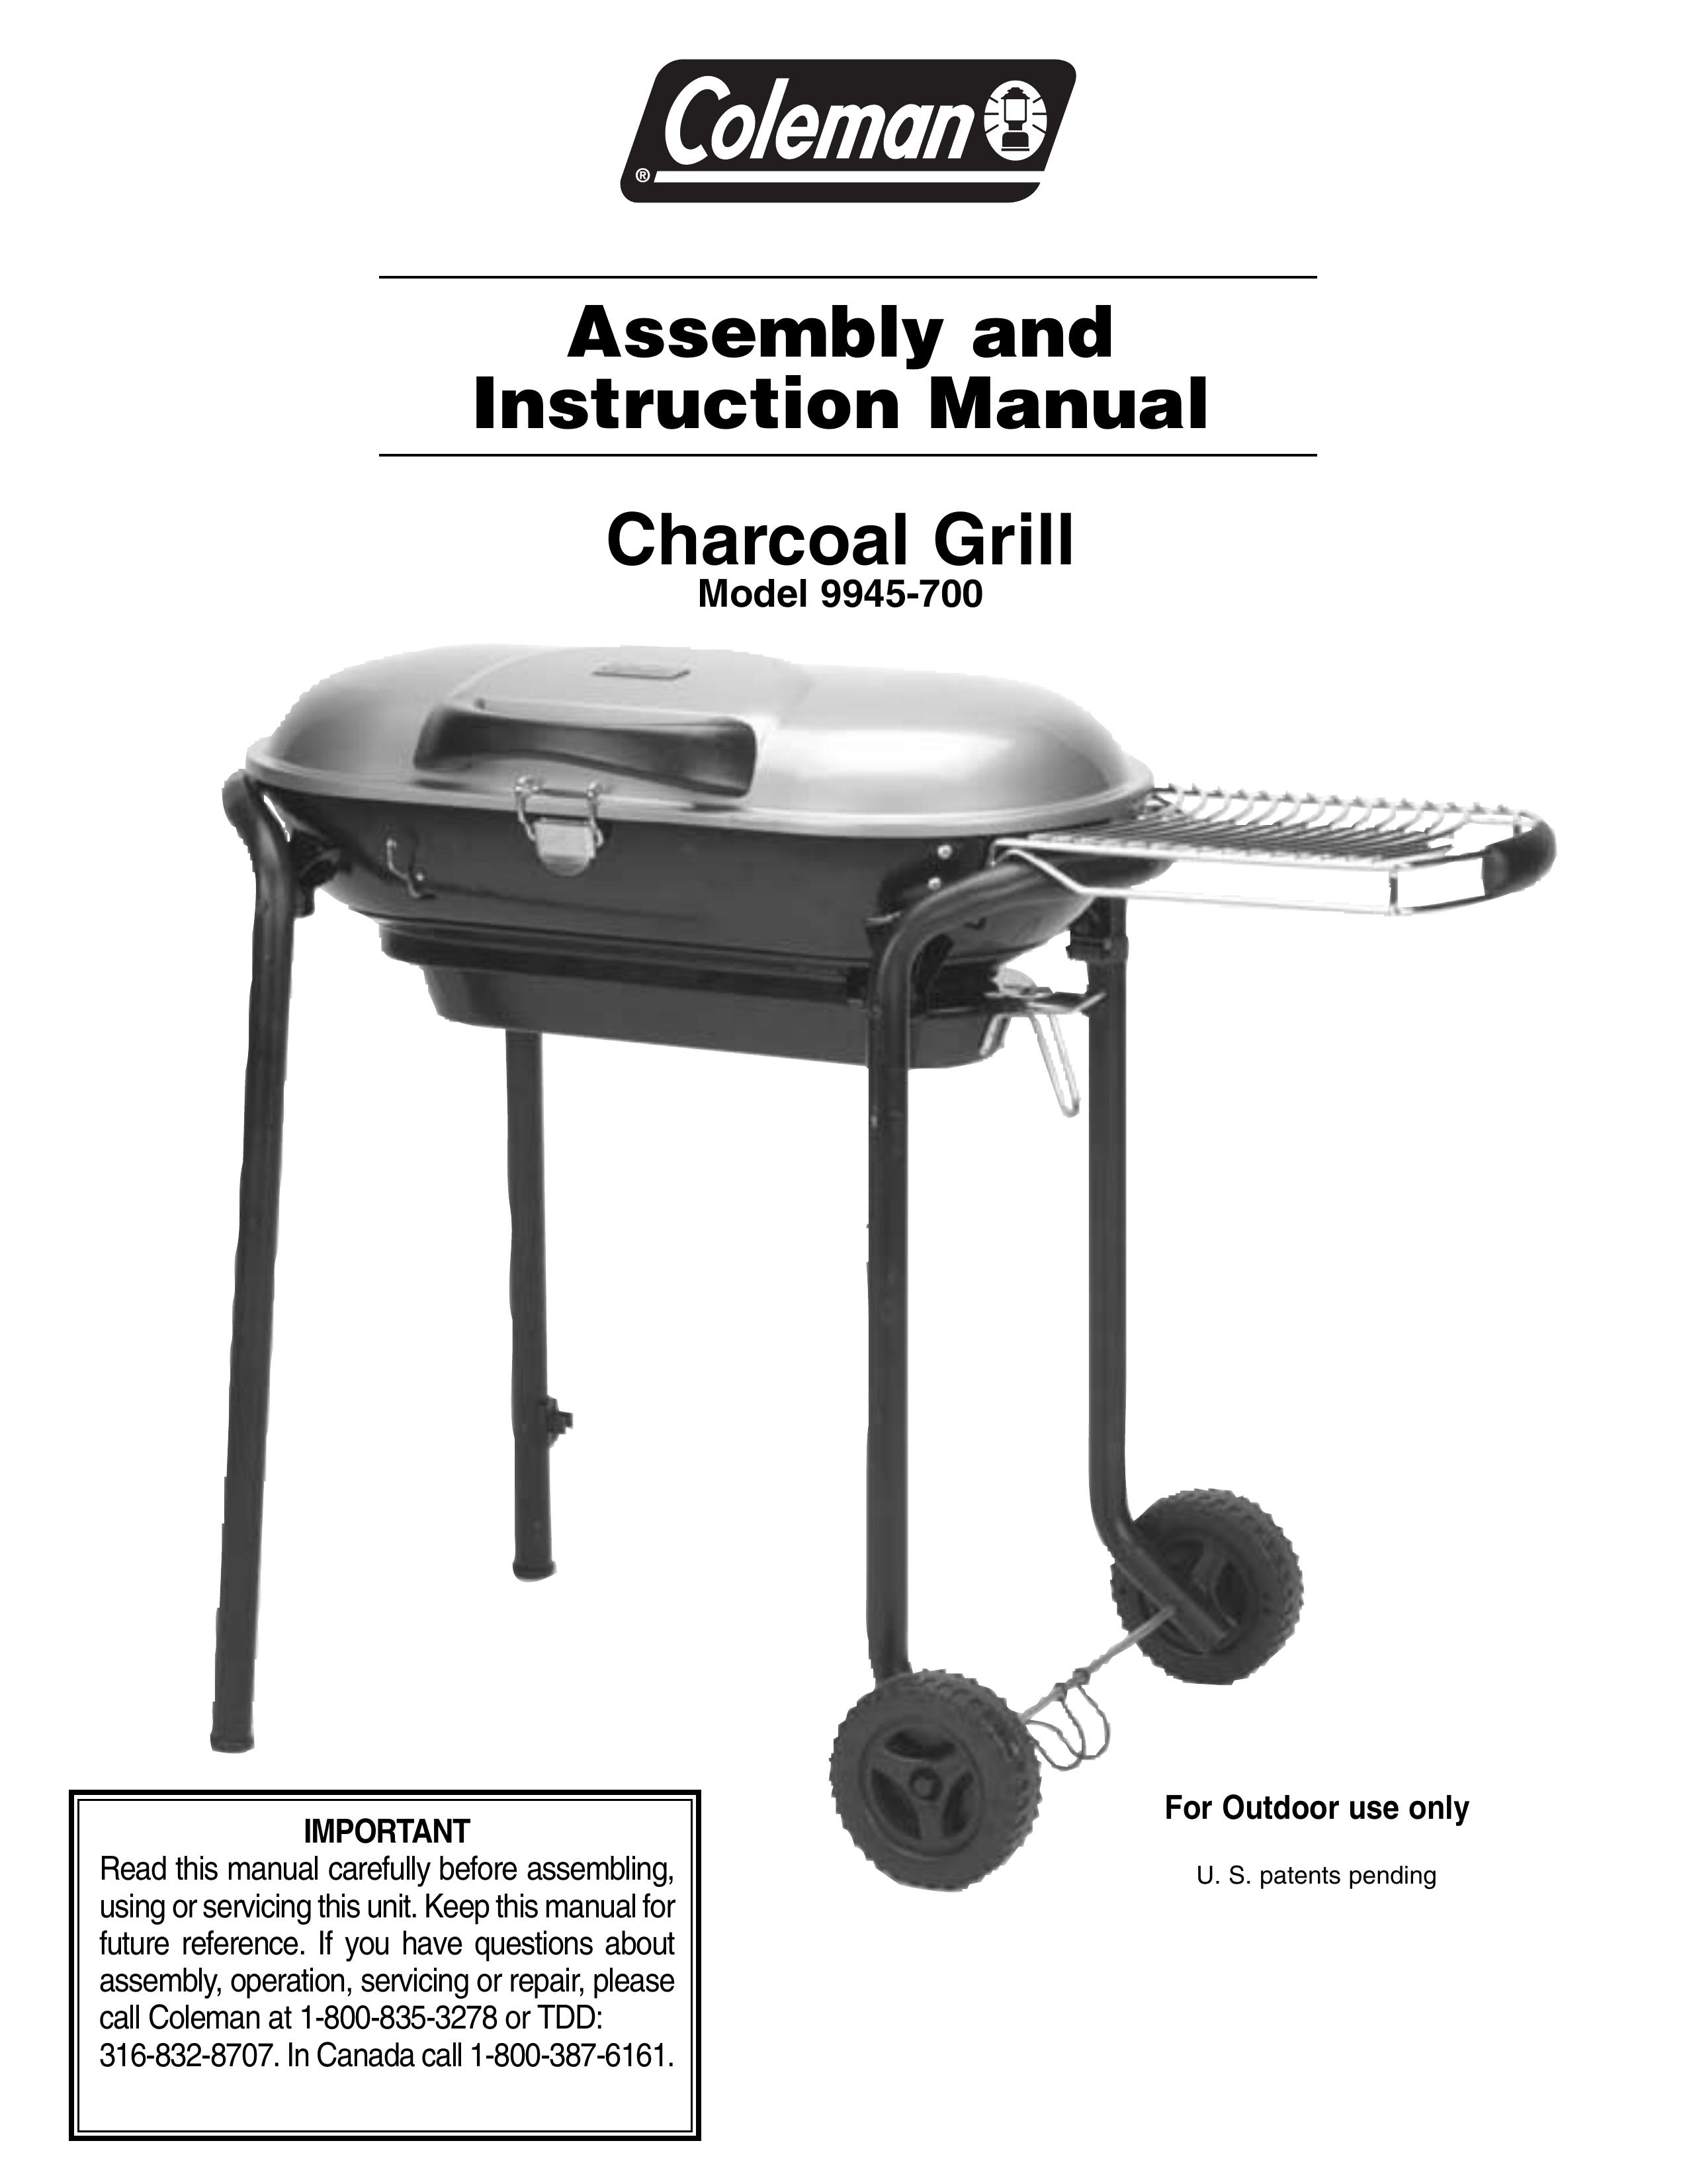 Coleman p9945-700 Charcoal Grill User Manual